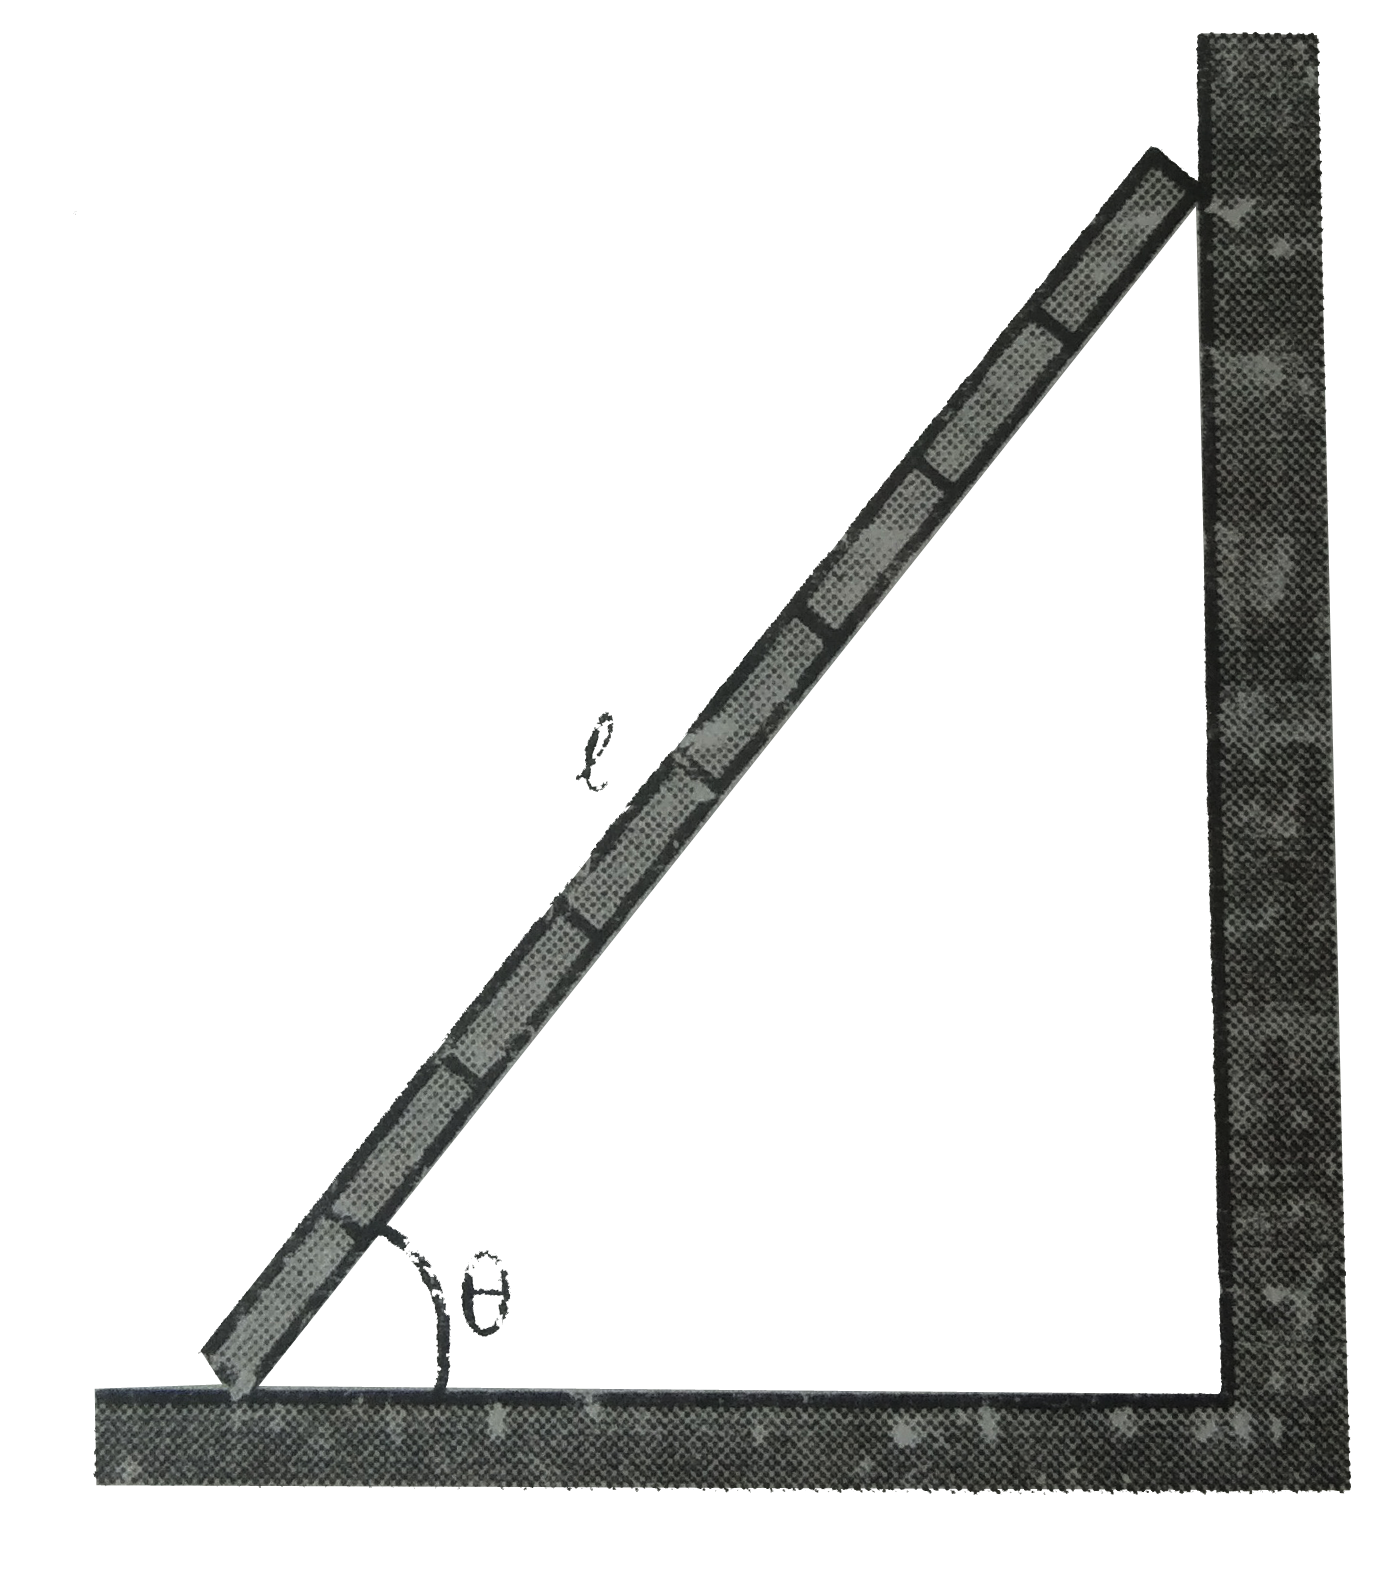 A uniform ladder of length l rests against a smooth, vertical wall (figure). If the mass of the ladder is m and the the coefficient of static friction between the ladder and the ground is mu(s) = 0.375 and the minimum angle theta(min) at which the ladder does not slip.      A uniform ladder at rest, leading against a smooth wall. Th ground is rough.